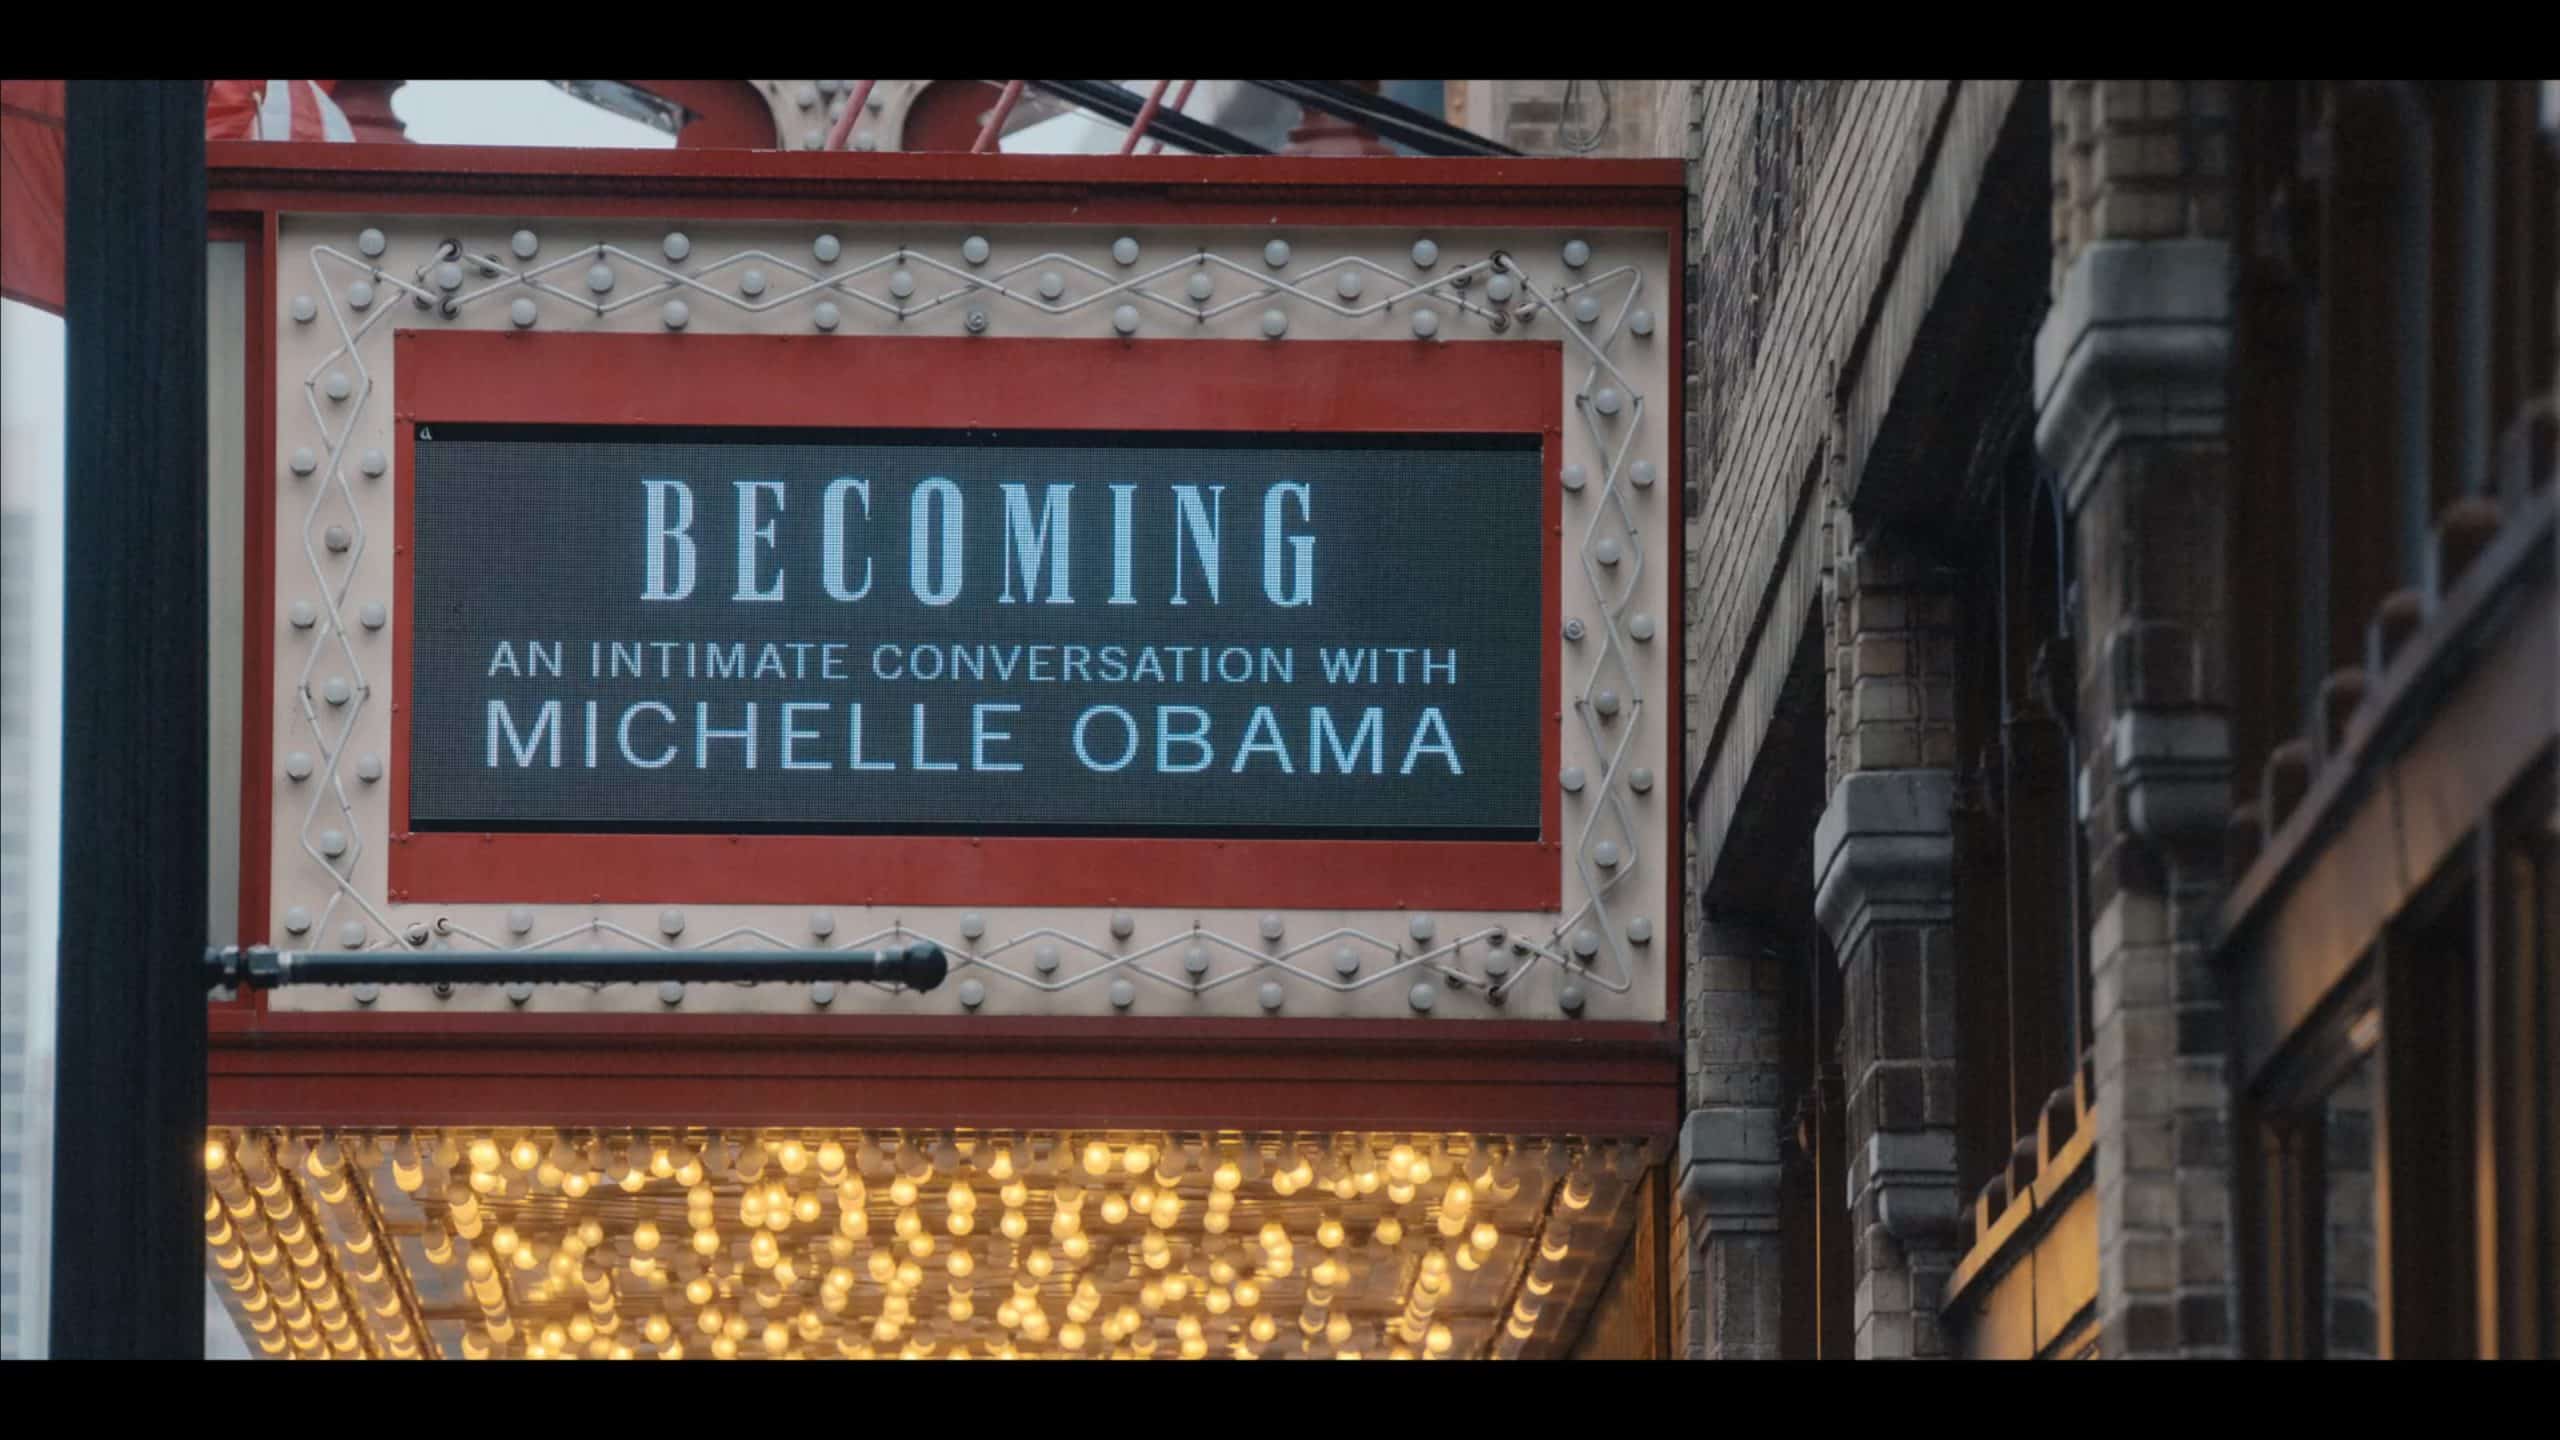 A sign advertising Michelle Obama's book "Becoming"